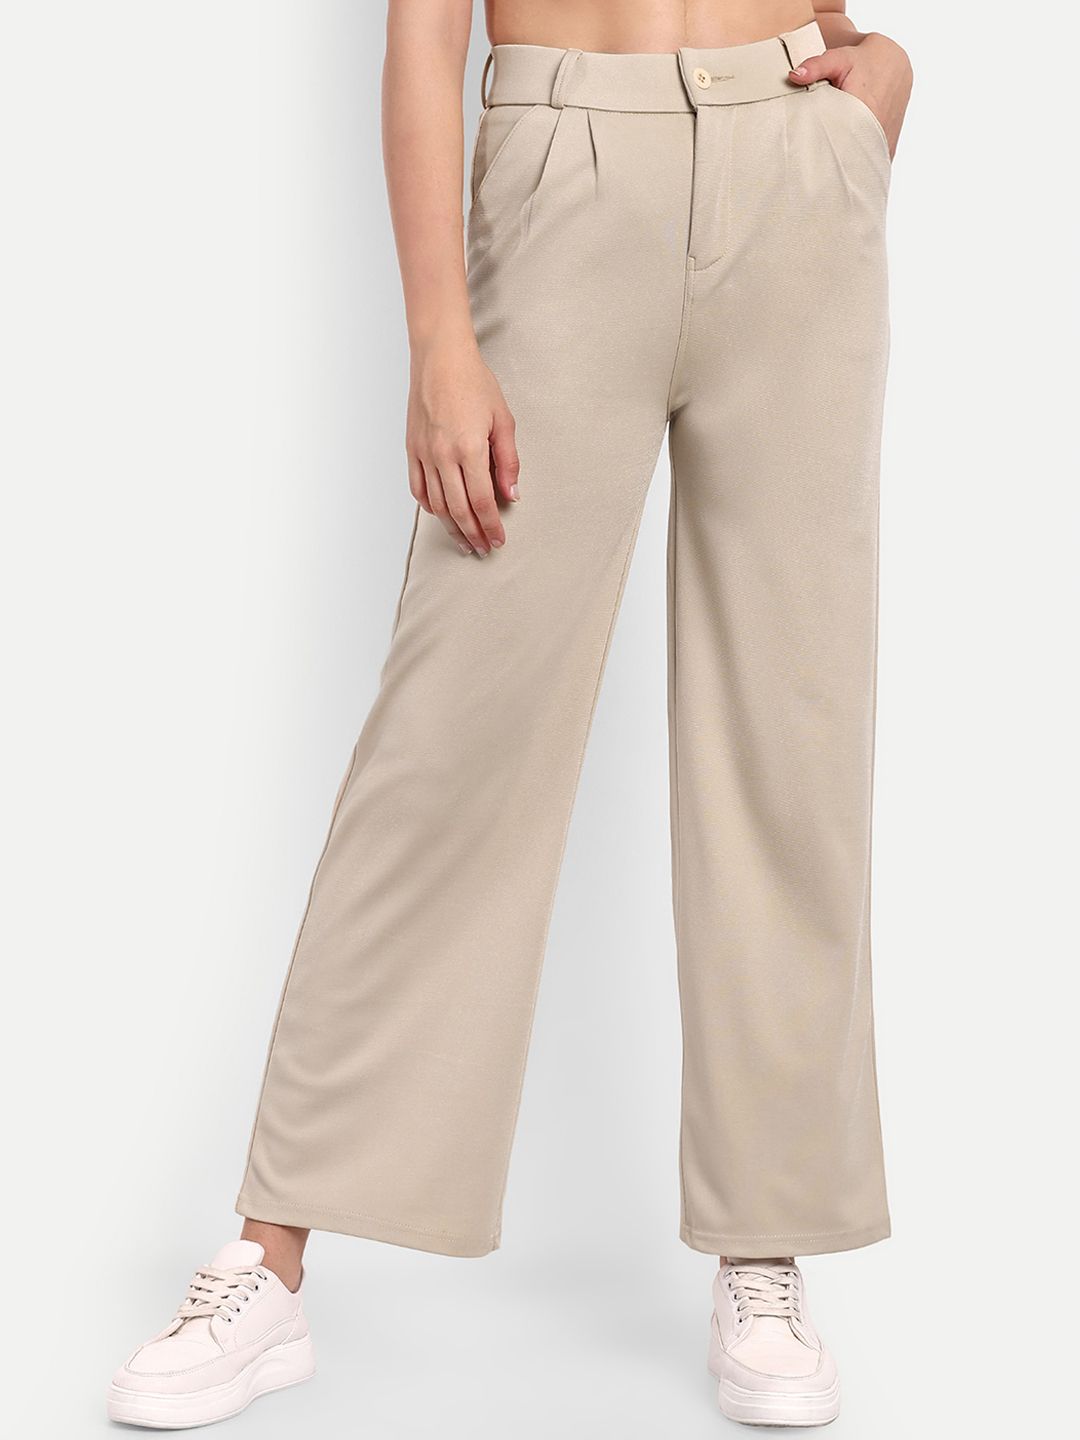 Next One Women Smart Loose Fit High-Rise Easy Wash Stretchable Parallel Trousers Price in India